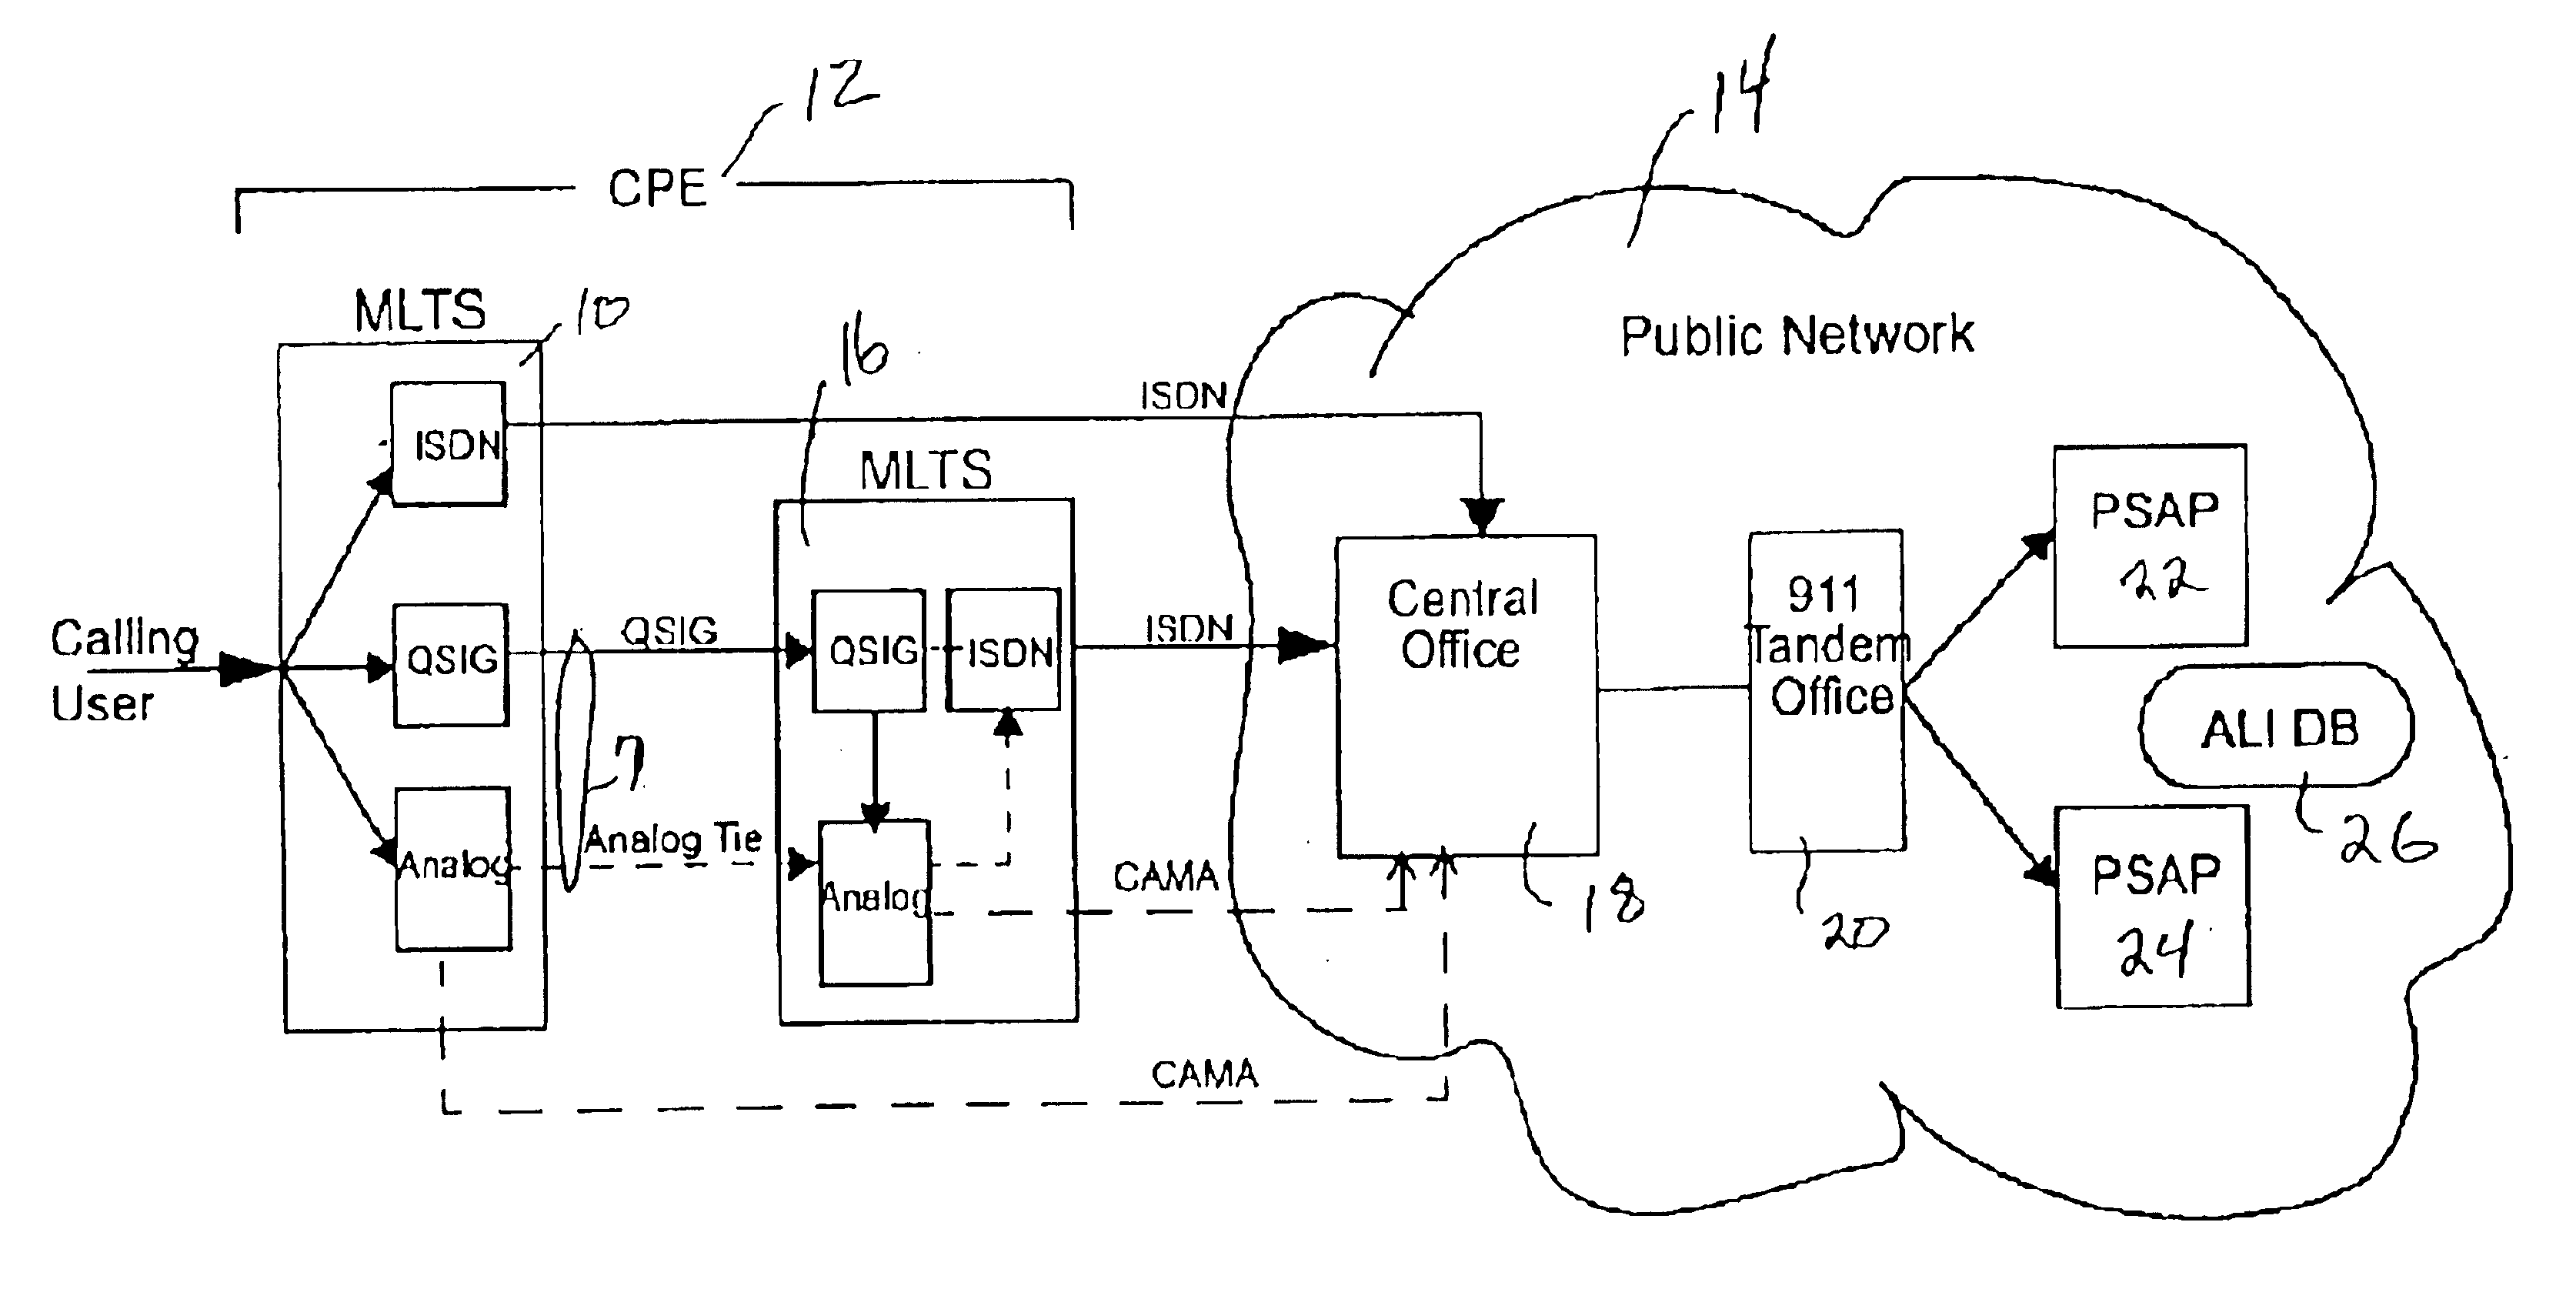 Priority based methods and apparatus for transmitting accurate emergency location identification numbers (ELINs) from behind a multi-line telephone system (MLTS)